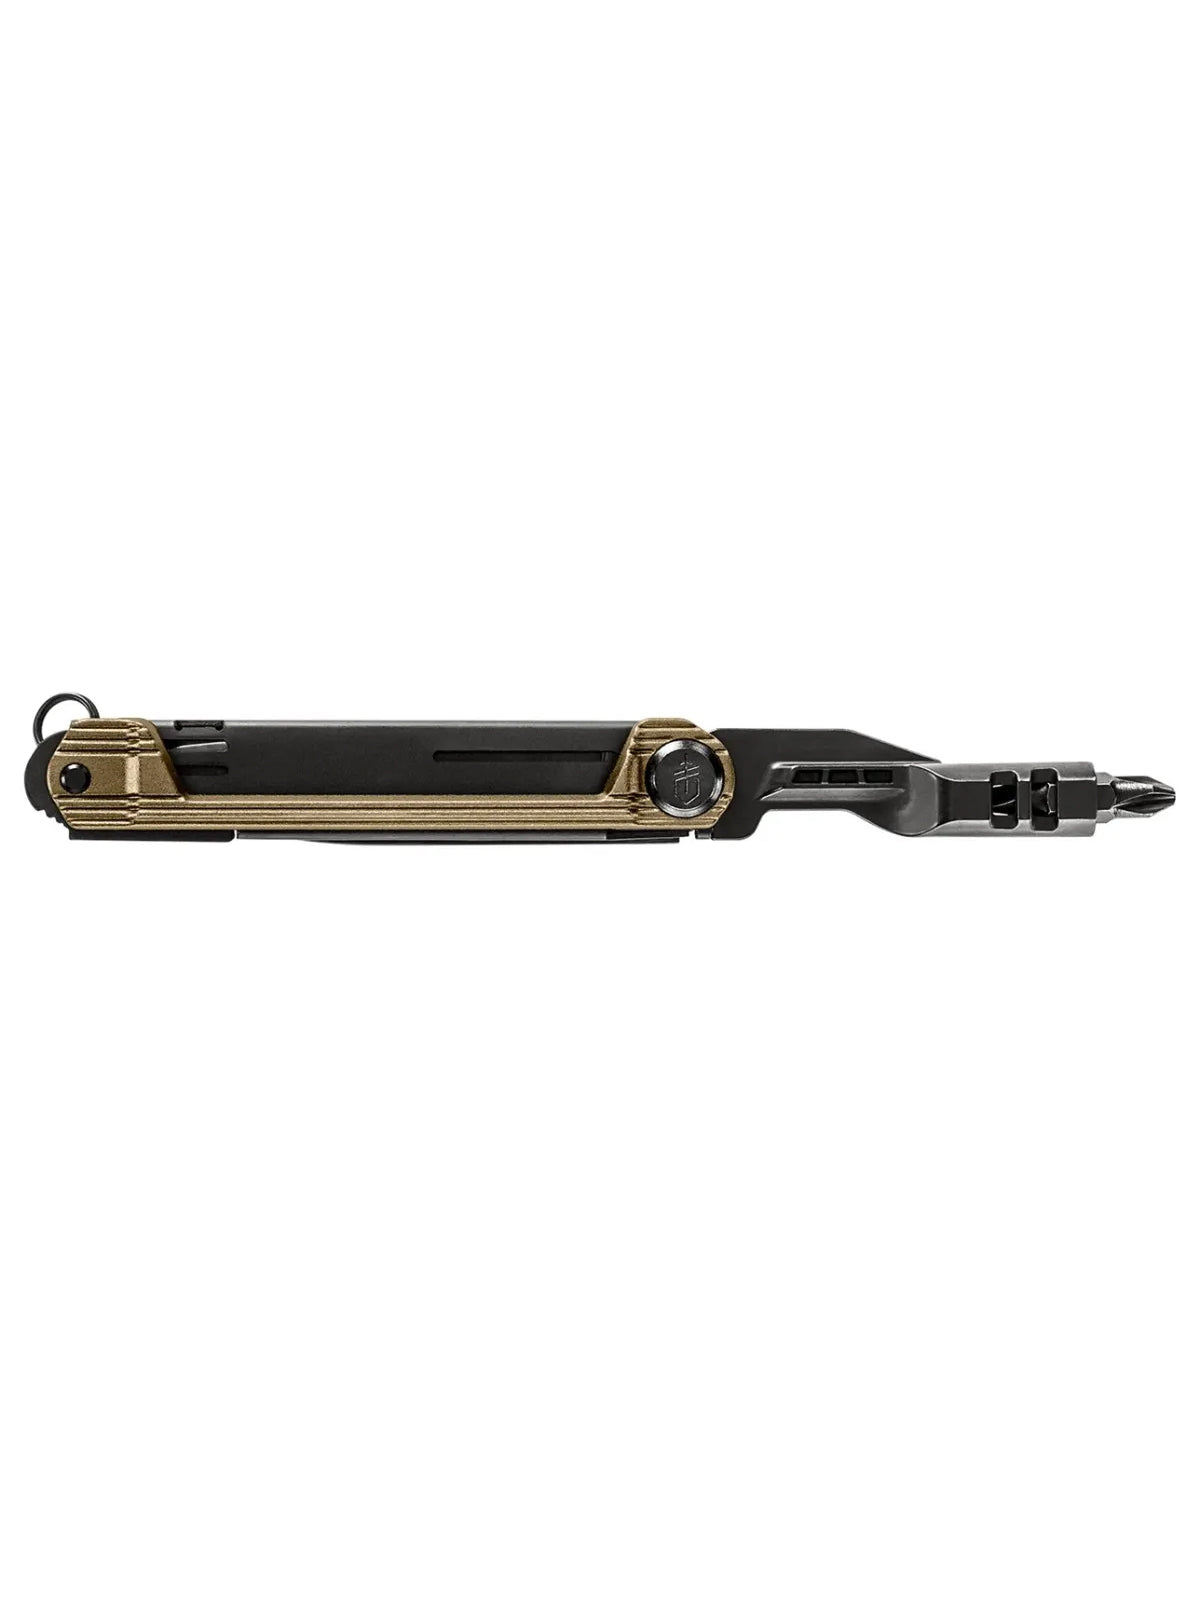 Gerber Armbar Slim Drive with centre drive extended